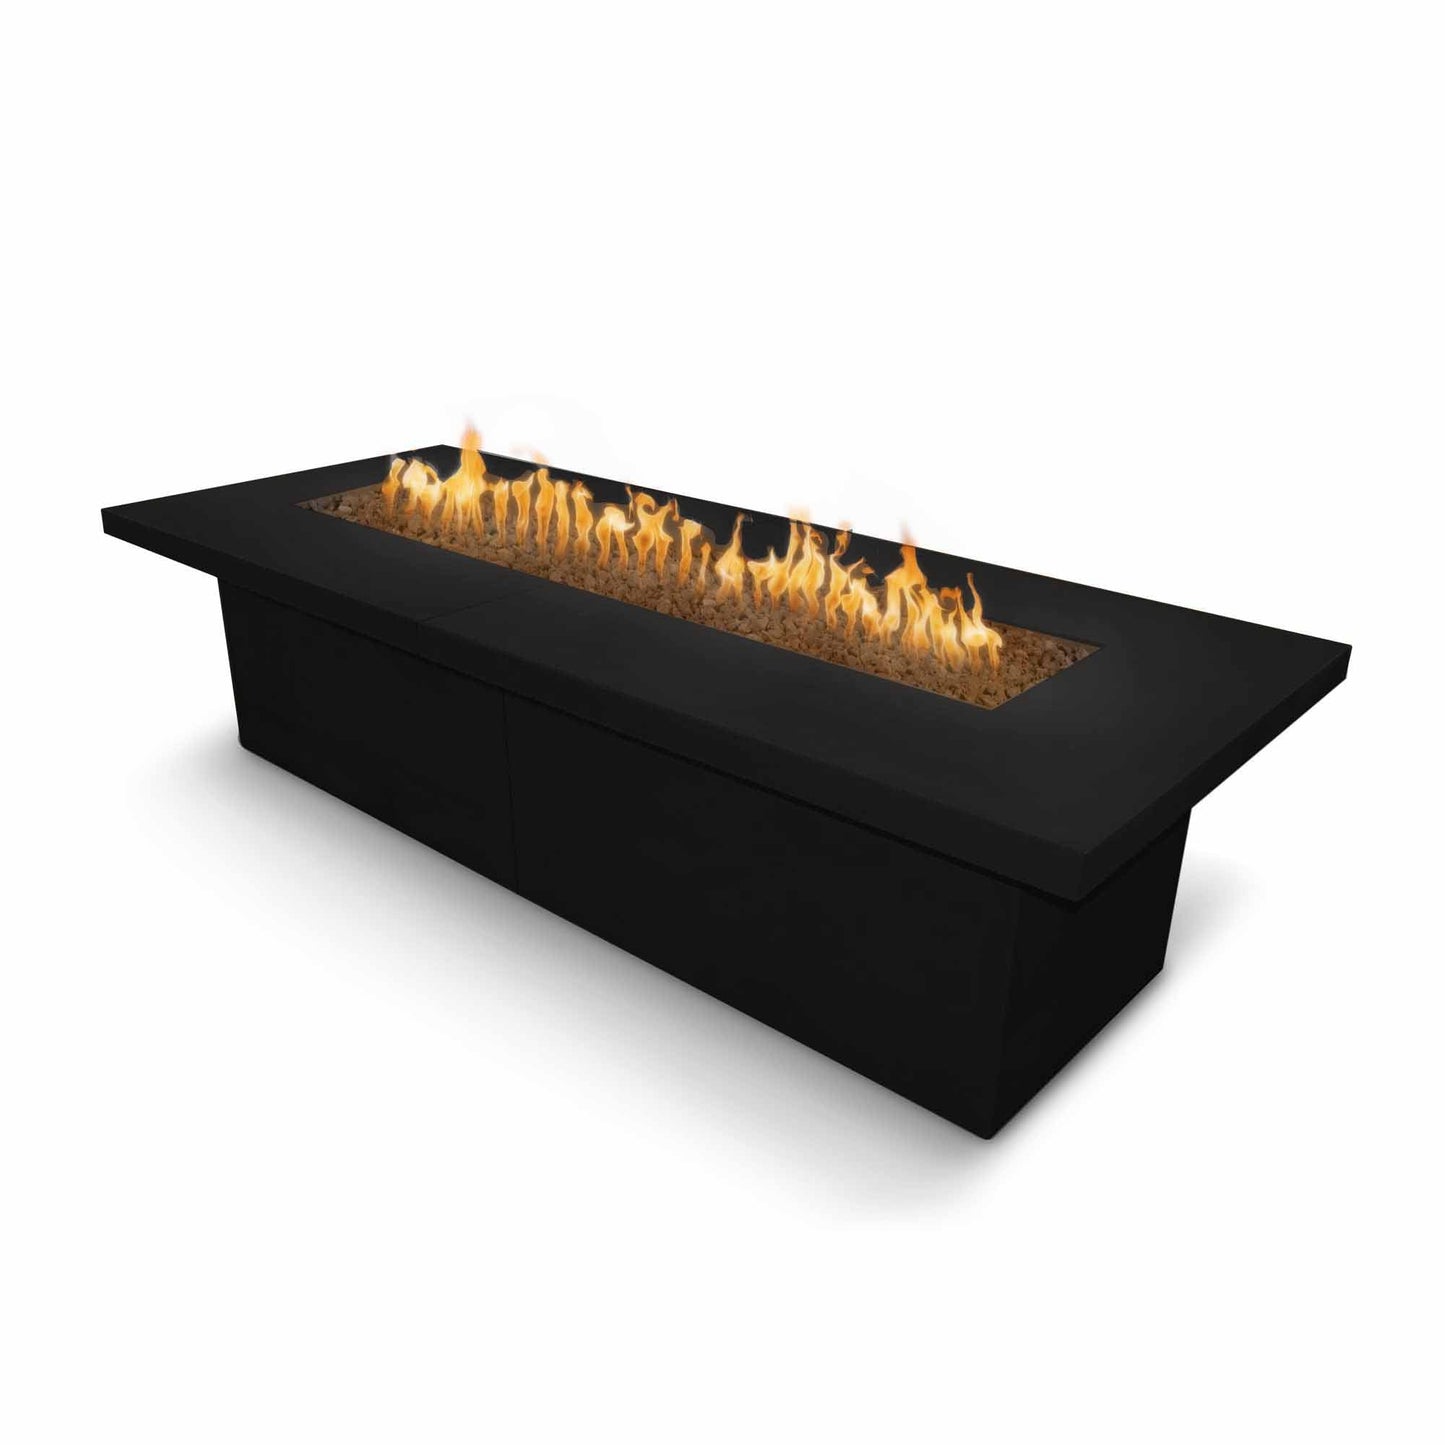 The Outdoor Plus Rectangular Newport 144" Copper Vein Powder Coated Metal Natural Gas Fire Pit with 110V Electronic Ignition